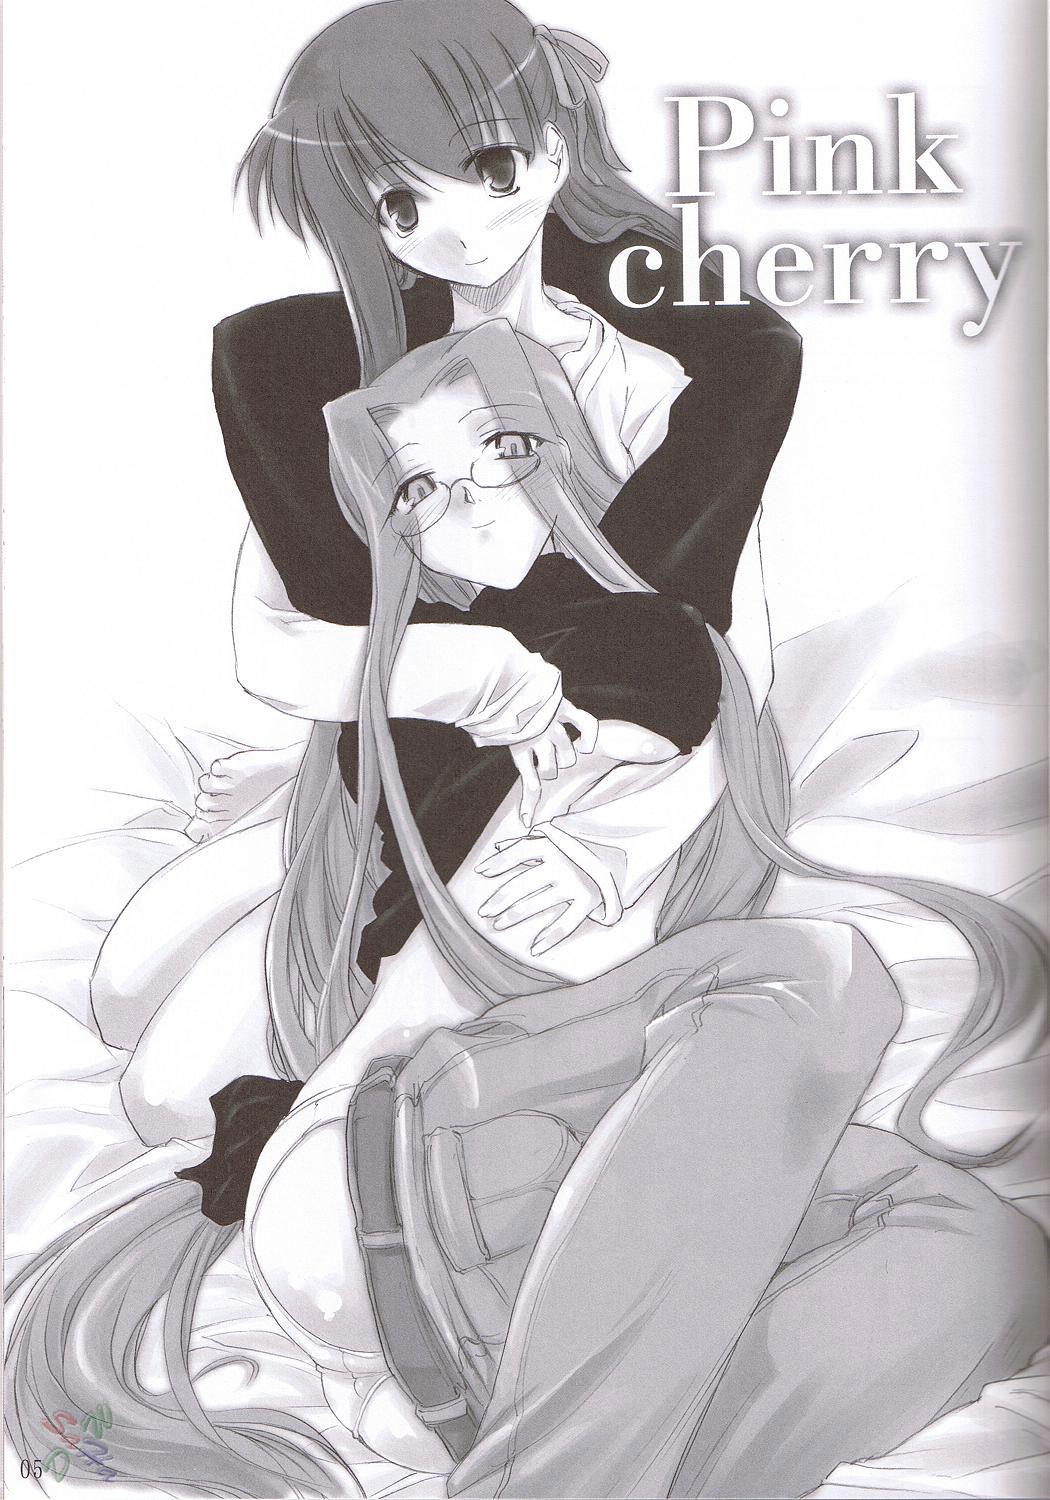 Mistress Pink Cherry - Fate stay night Piercing - Page 4